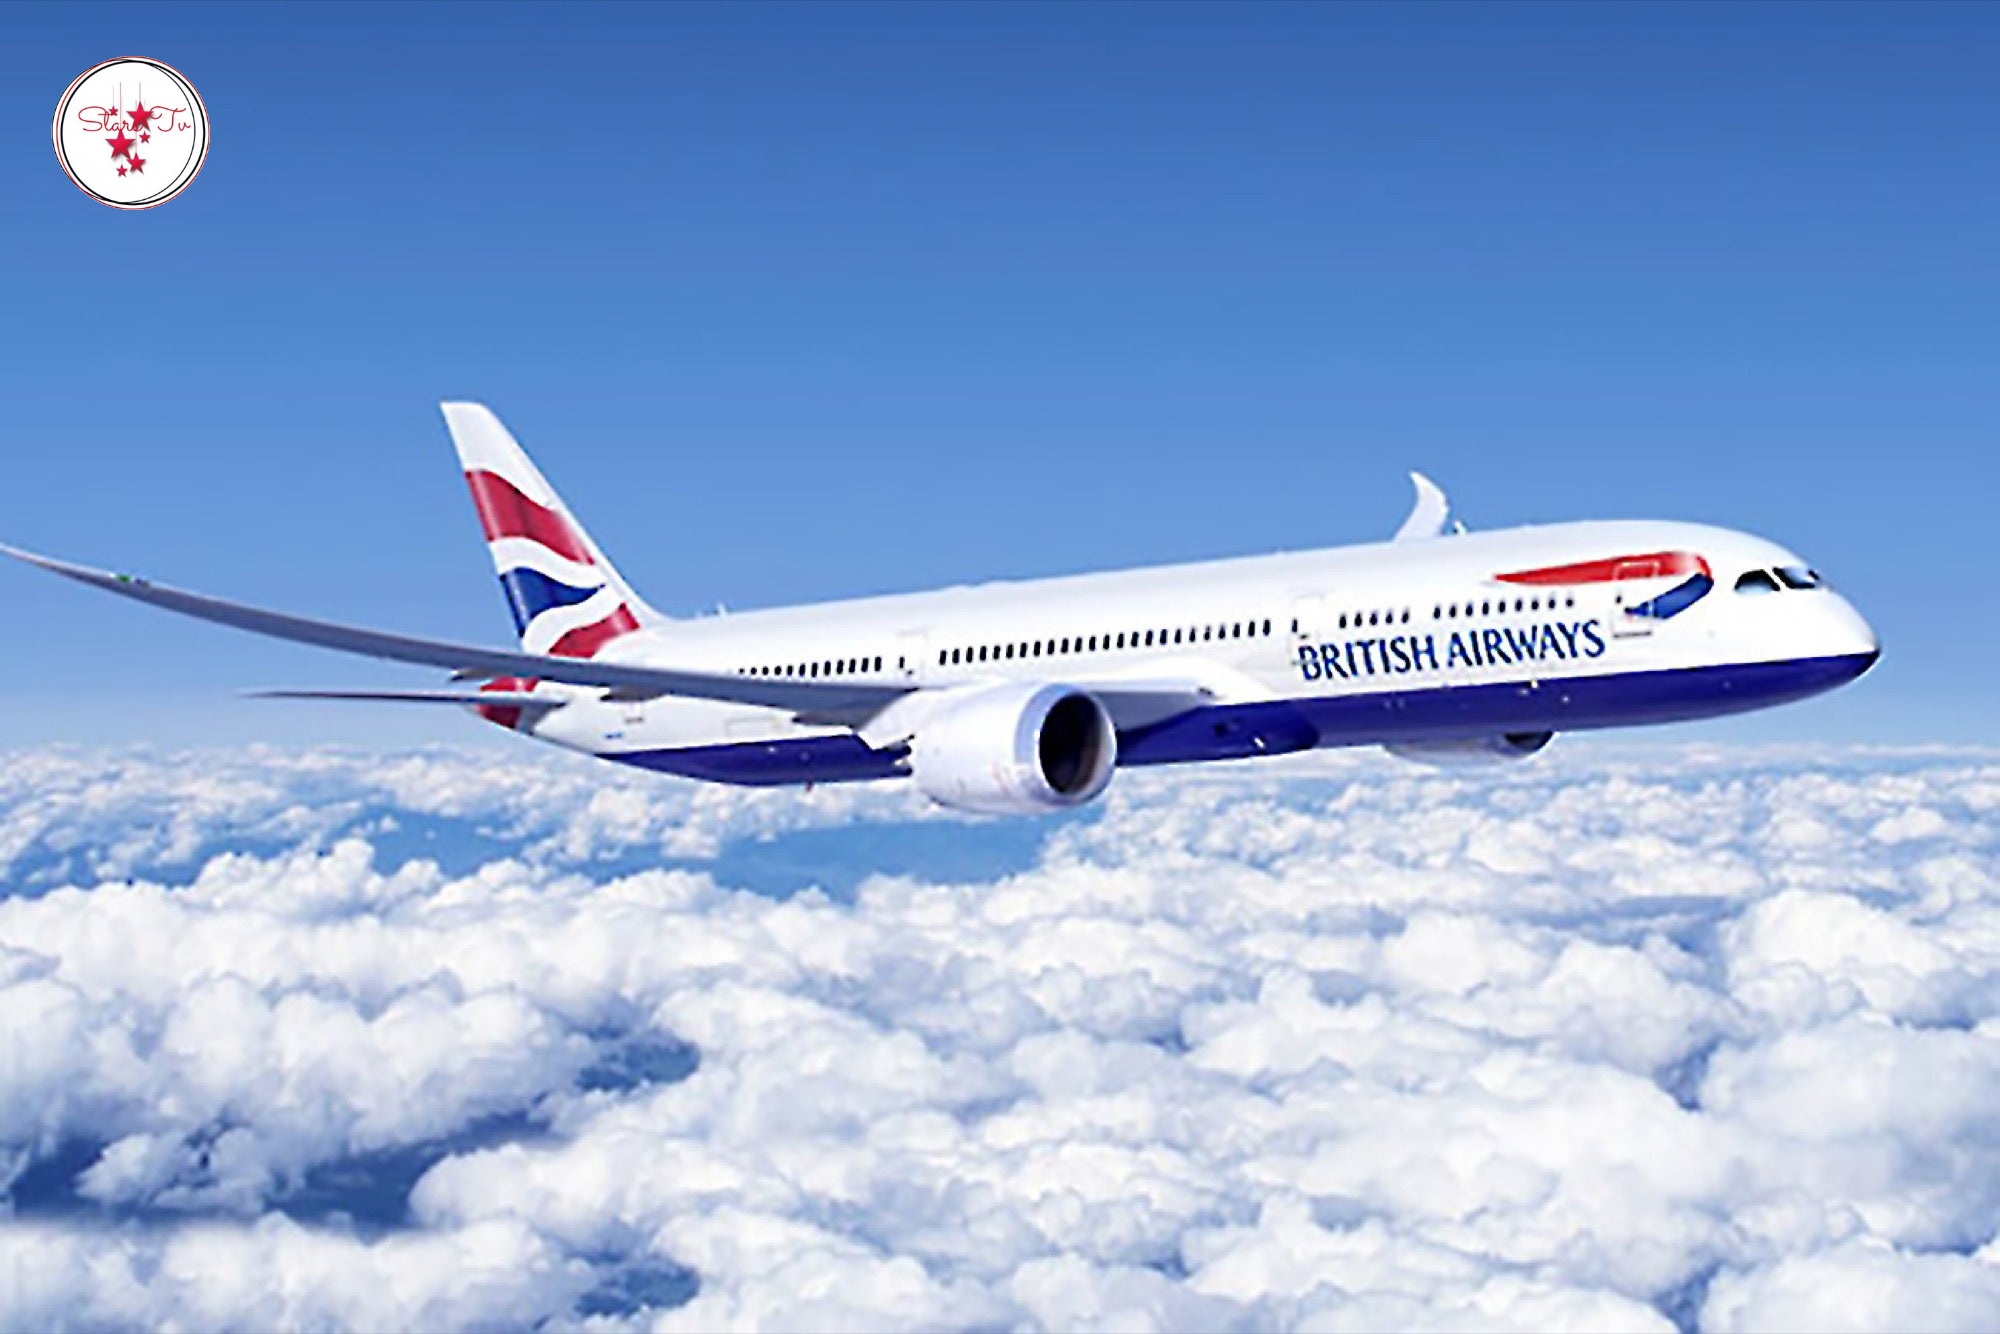 British Airways places lots of staff back on furlough